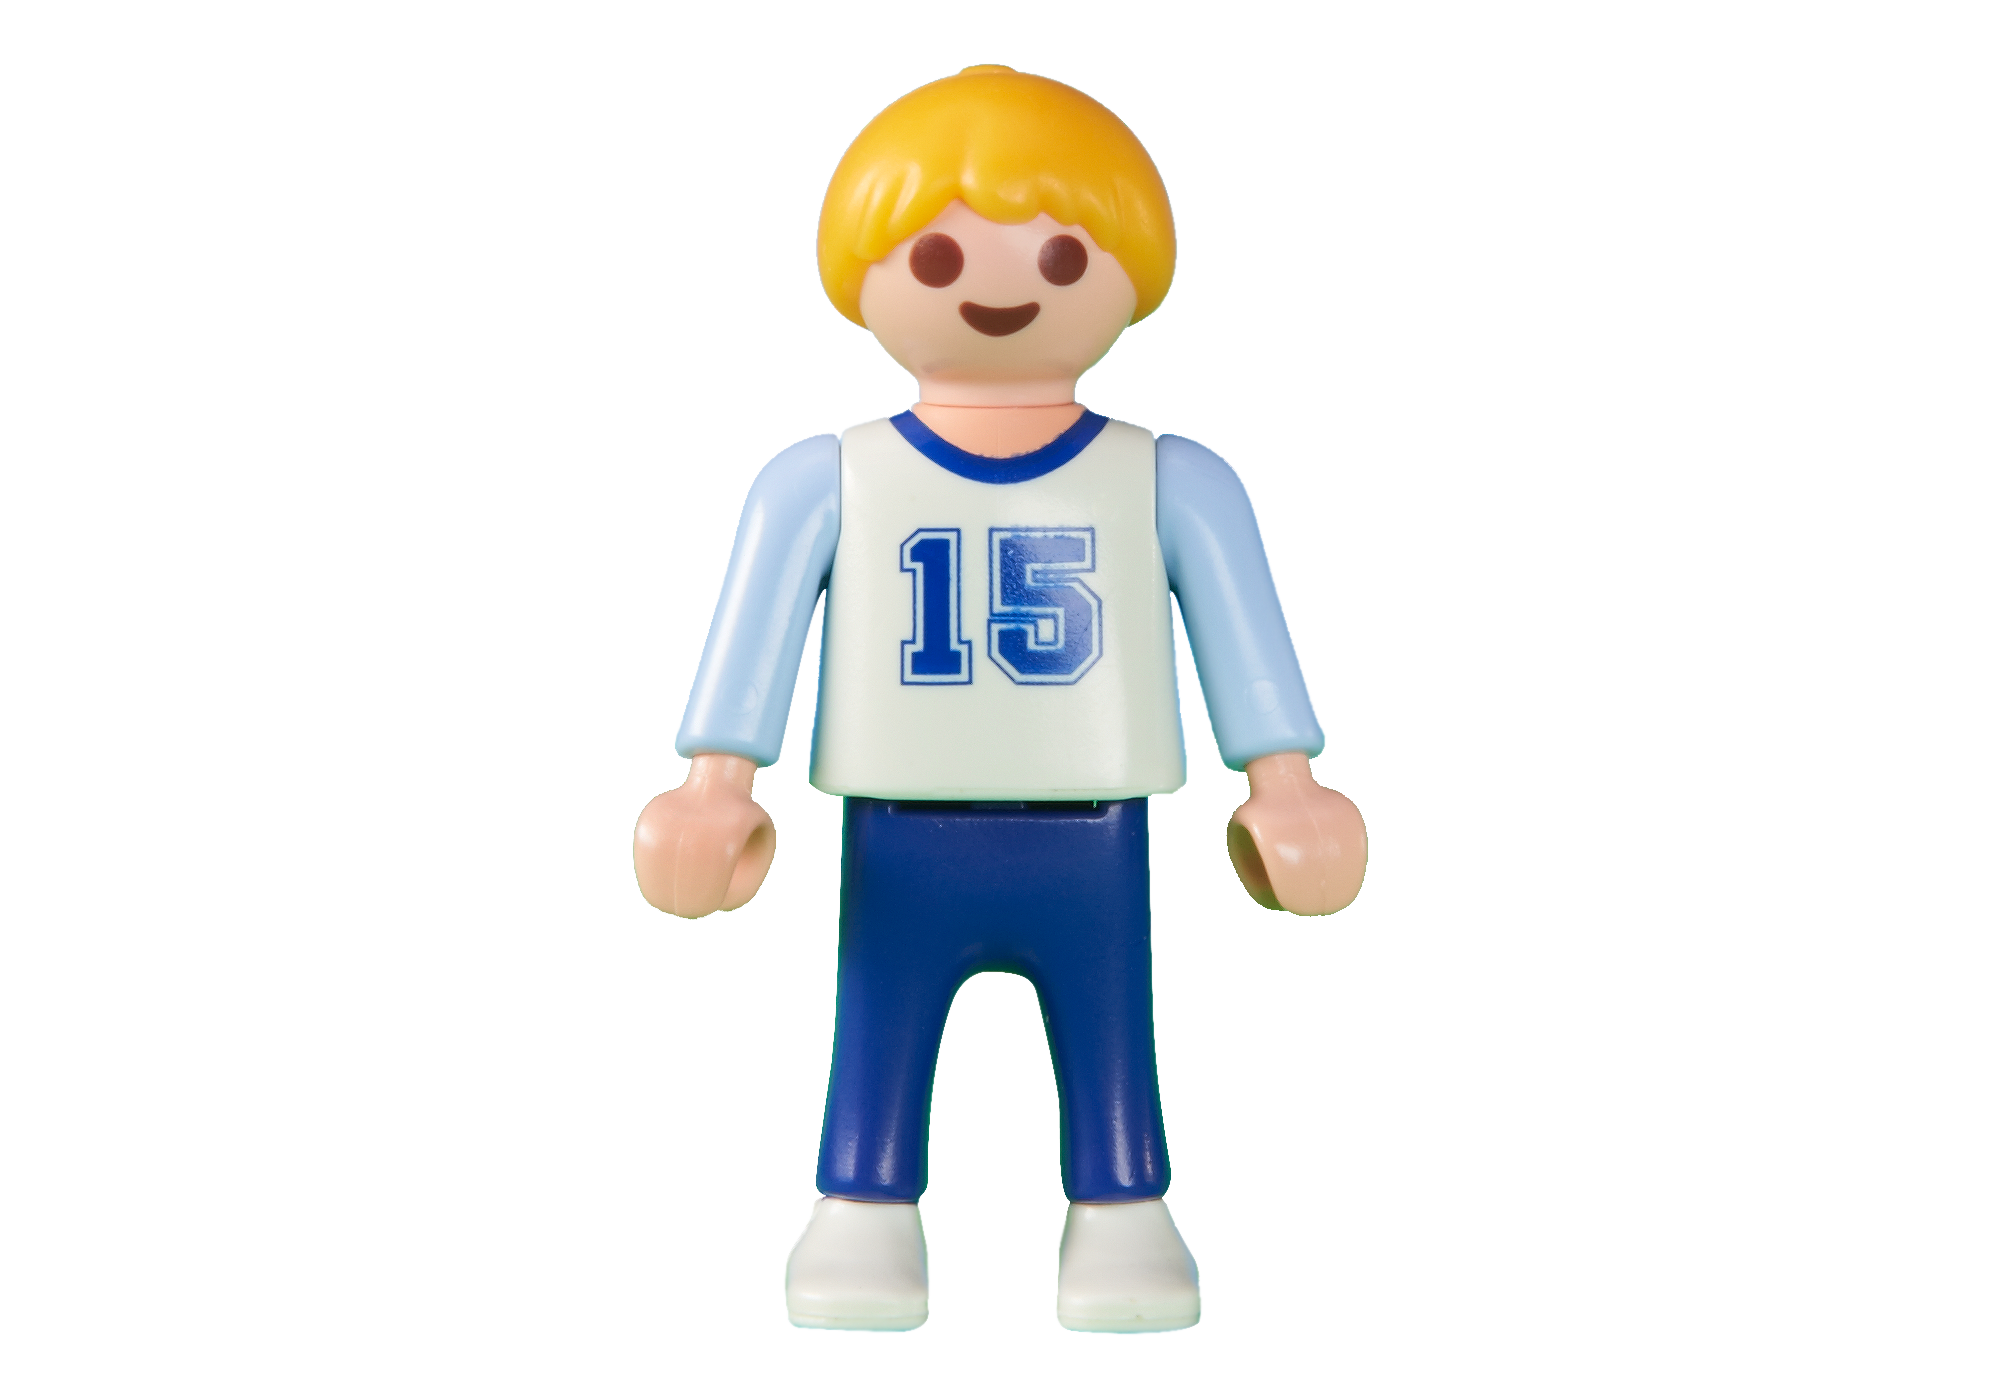 playmobil personnage